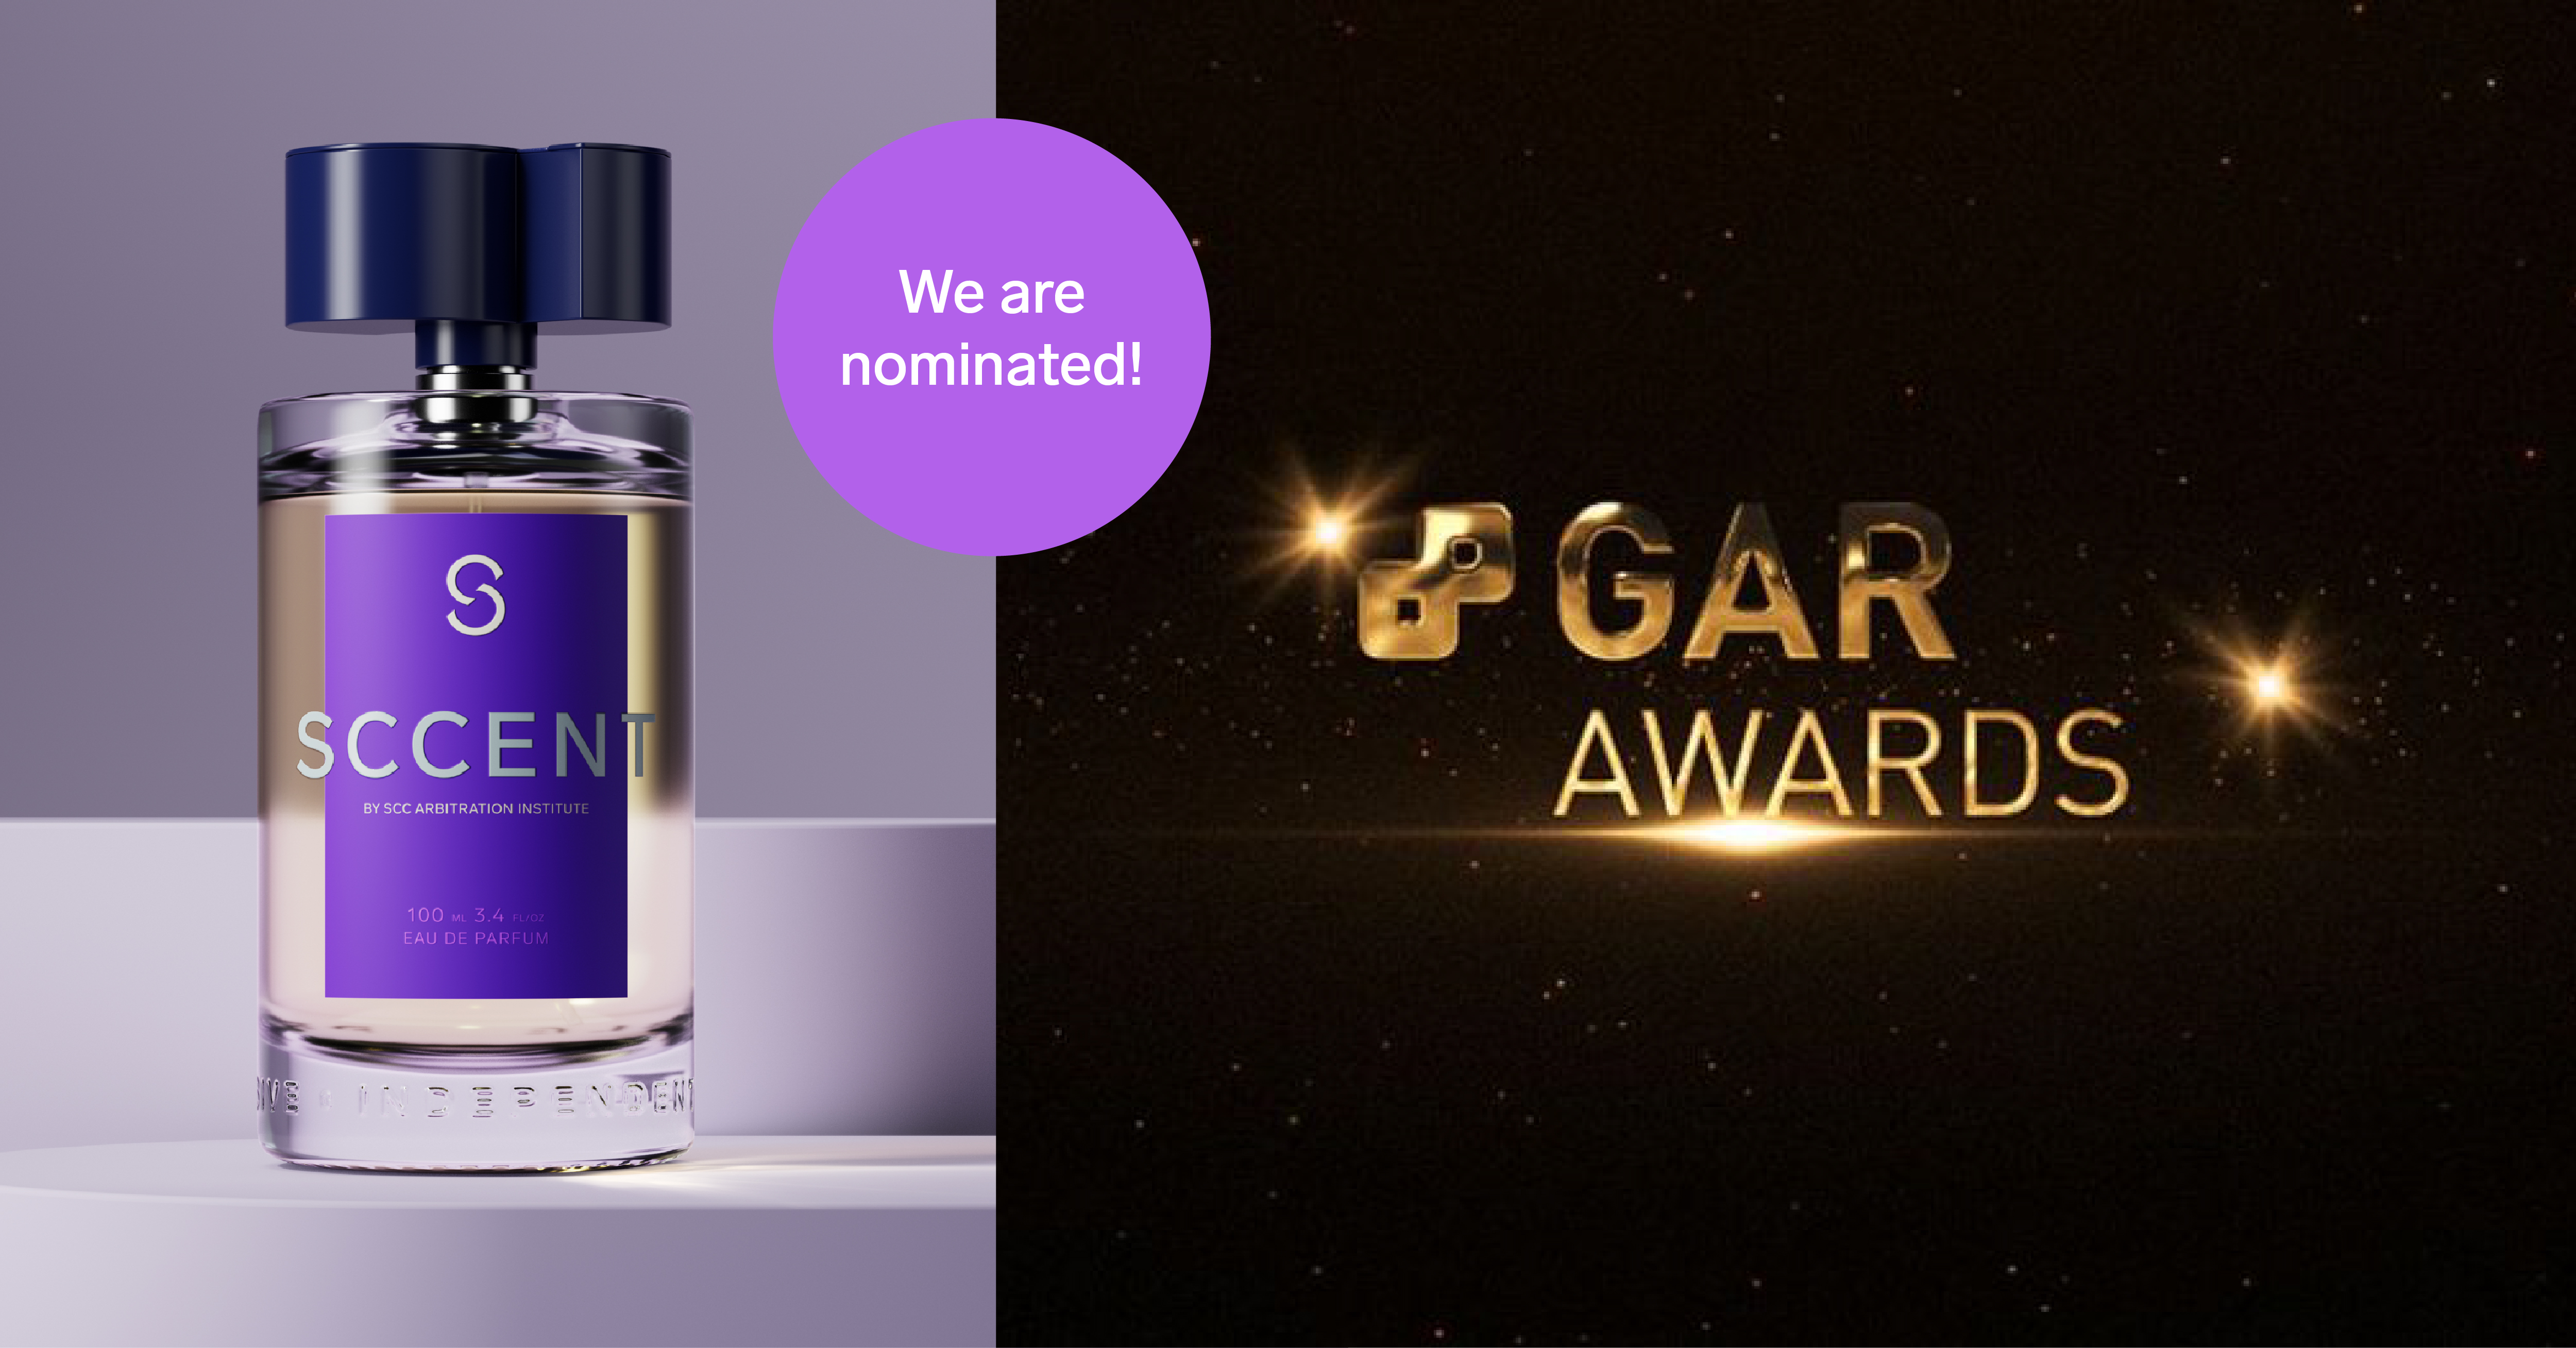 The SCC perfume SCCENT bottle and image of GAR Awards logotype